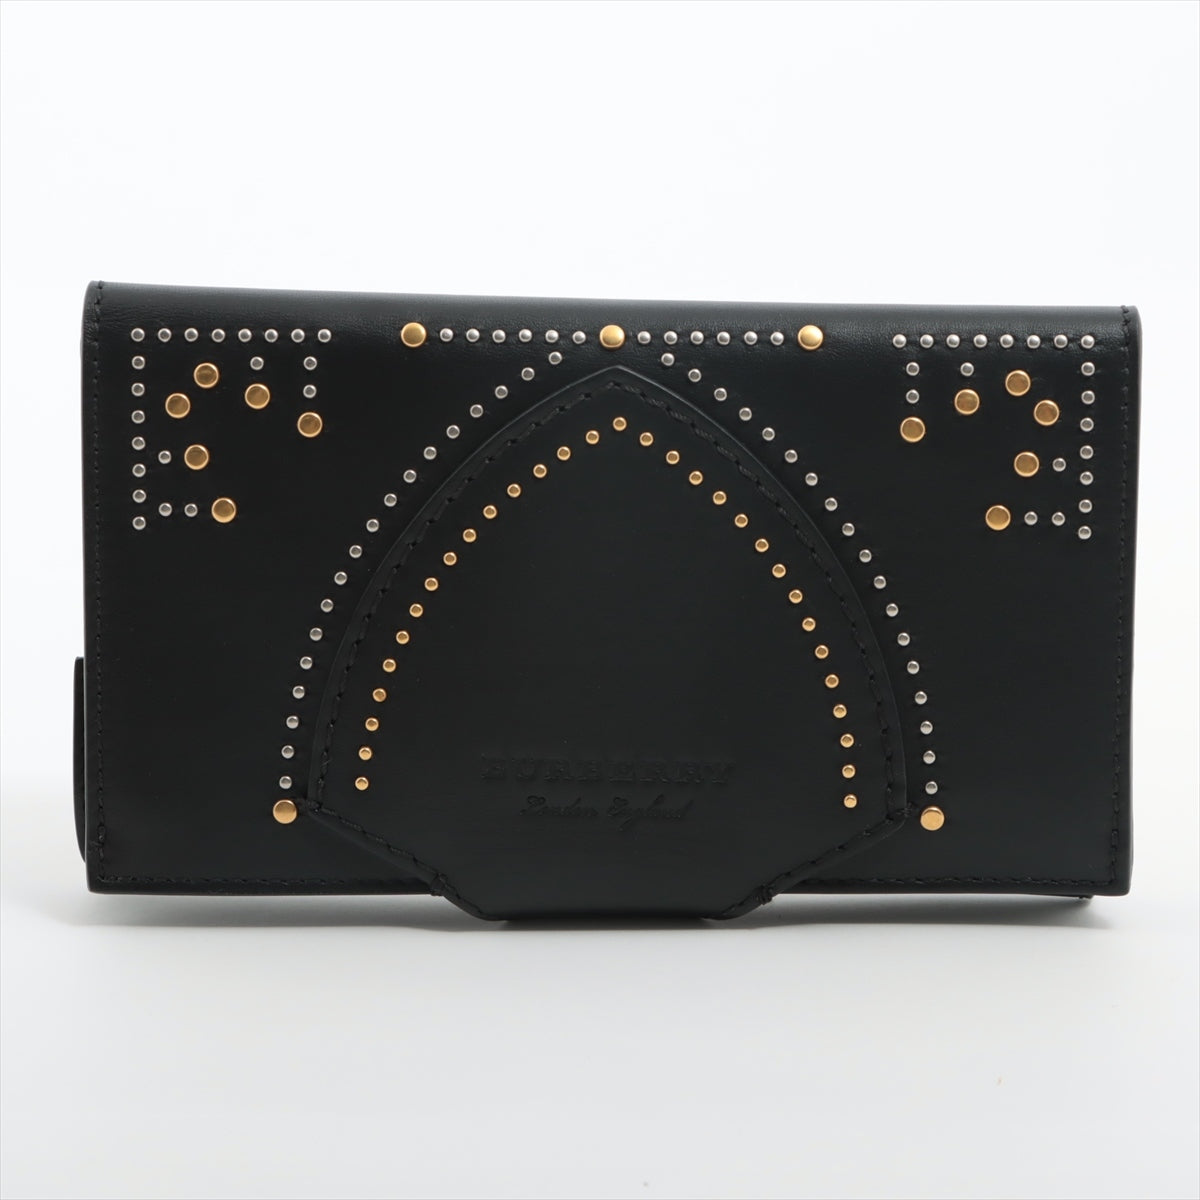 Burberry Studs Leather Wallet Black